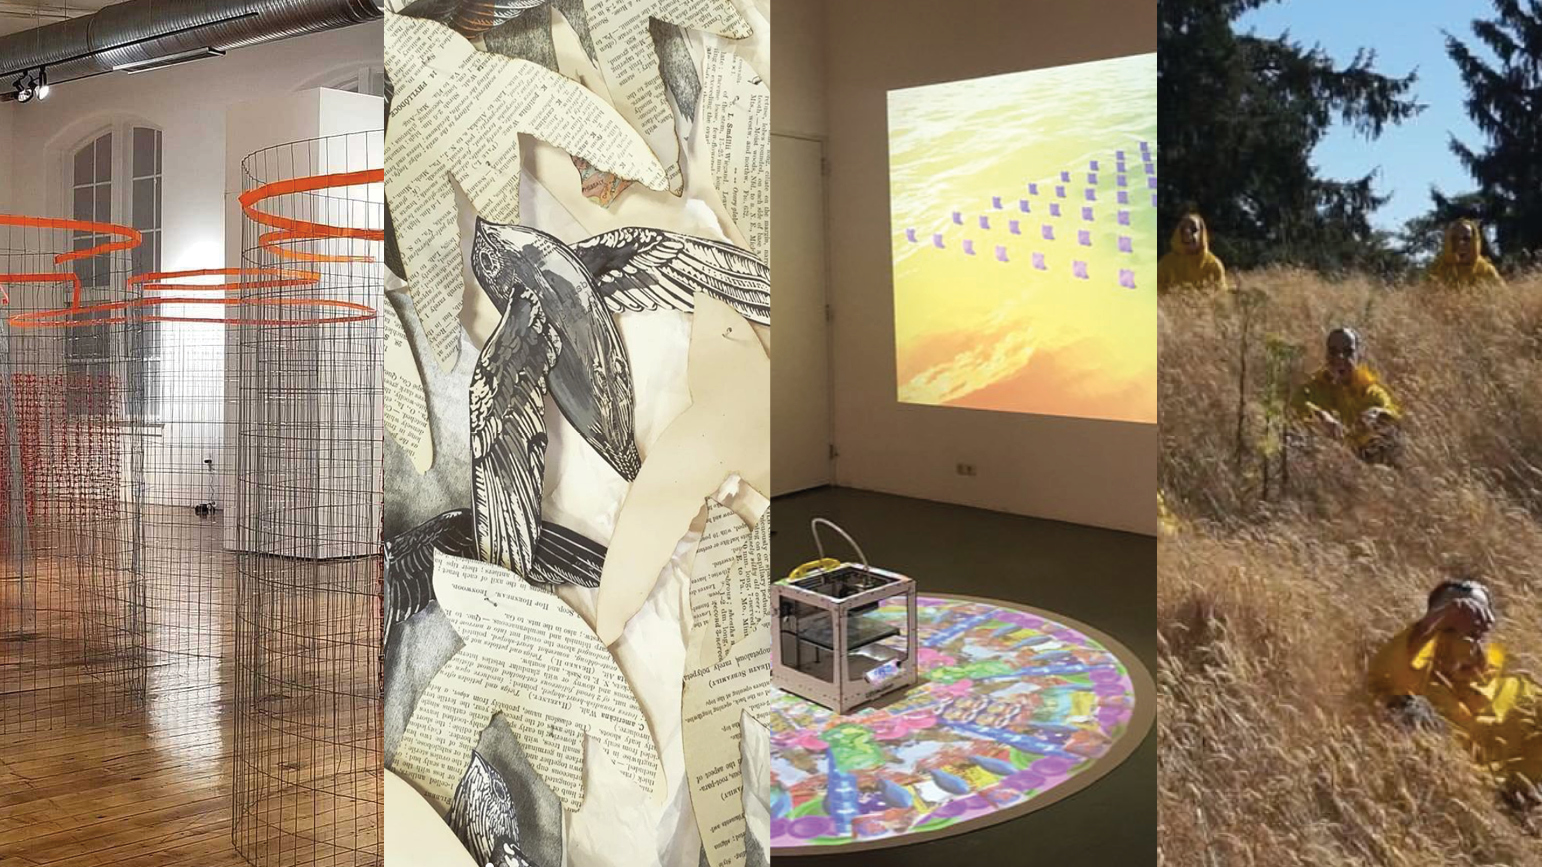 Four images of artworks - 1. abstract wire sculptures; 2. birds cut out of book pages, 3. small square sculpture sitting on the floor with a projection behind, 4. still from a film with monks sitting in a field